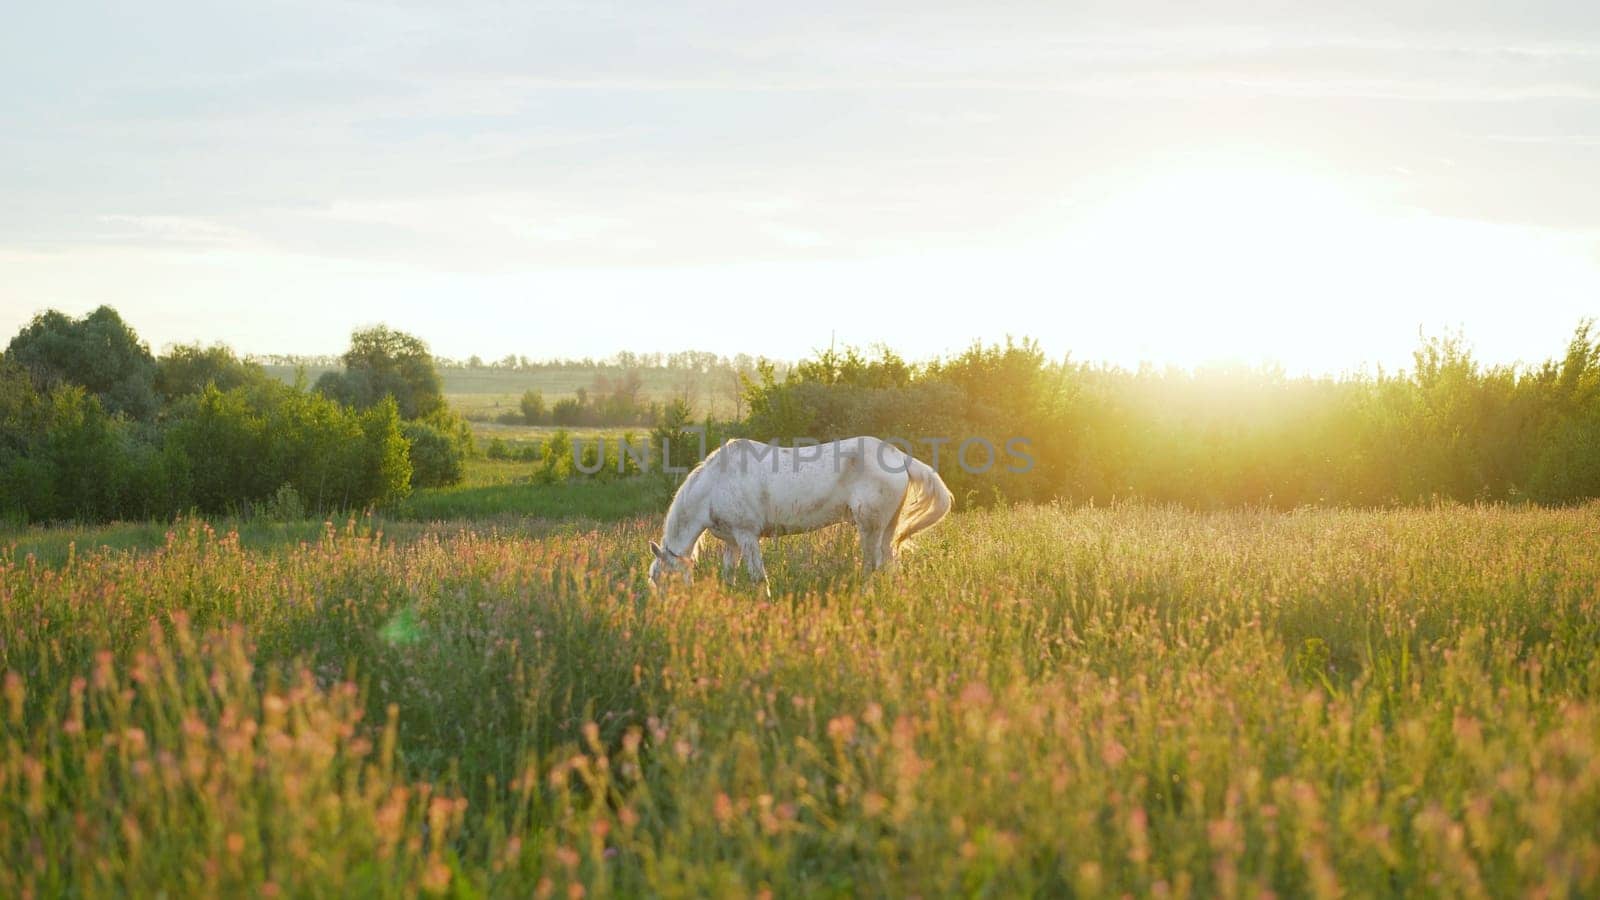 Horses eat green grass in the meadow after the rain. Horses in the meadow after the rain. Rural landscape with grazing horses. Brown and white horse in the pasture. Beautiful horses on a farm after the havy rain.